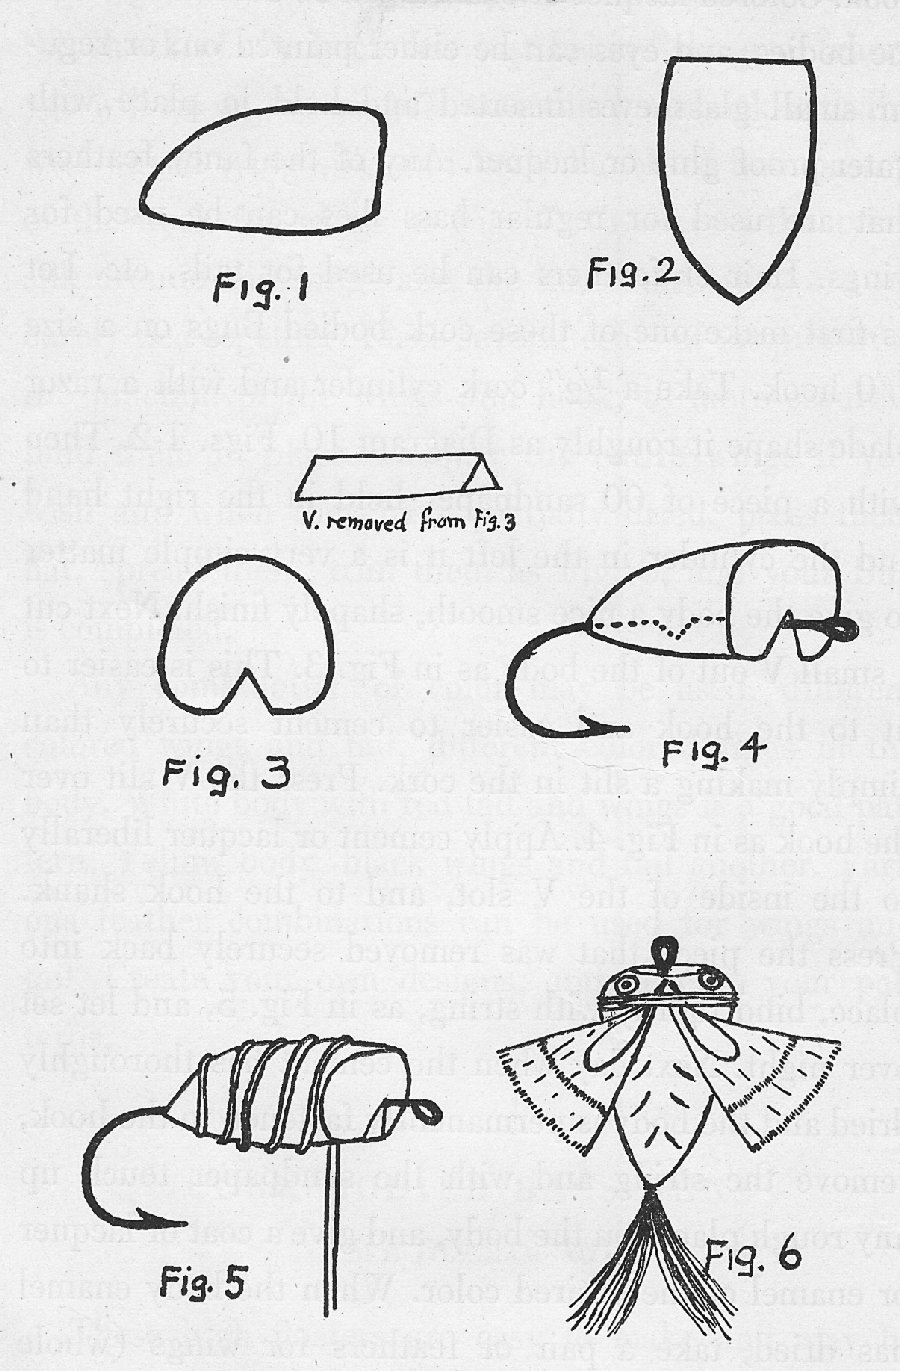 Page sized diagram showing drawings of cork bodied bass bug
construction.